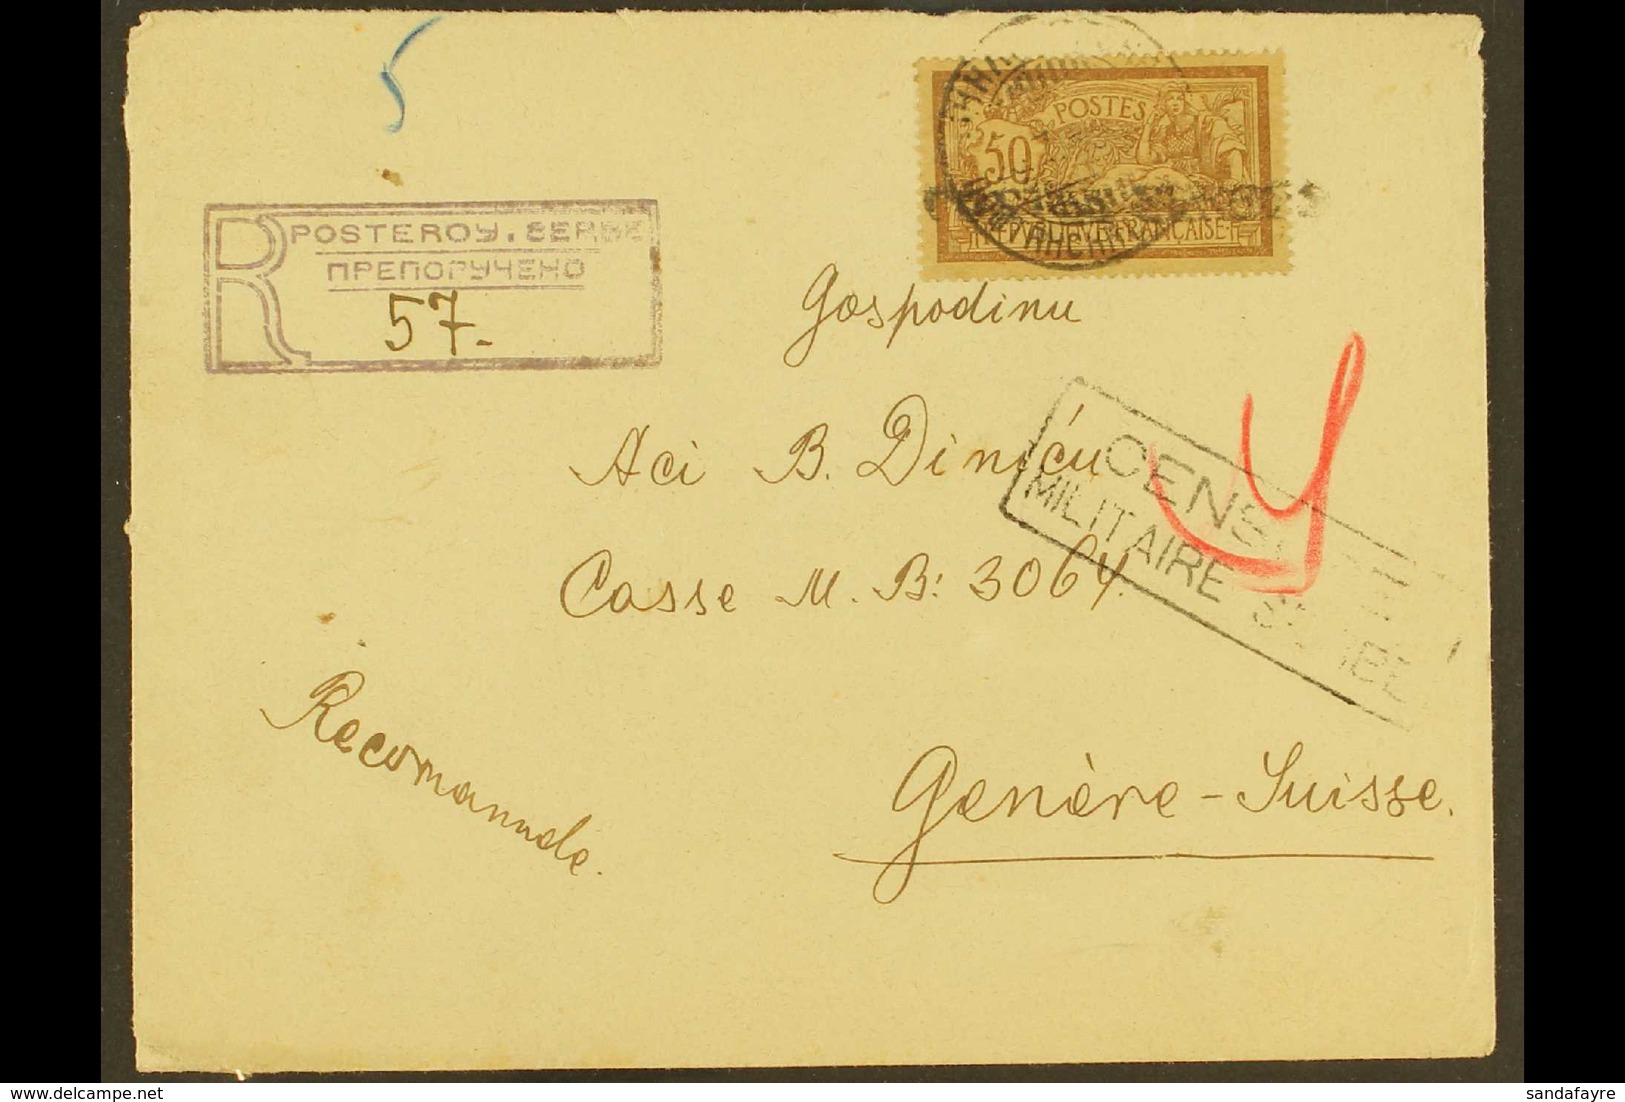 1918 Registered Censored Cover From Corfu Addressed To Switzerland, Bearing France 50c Stamp Tied By Serbian Cyrillic Cd - Serbien